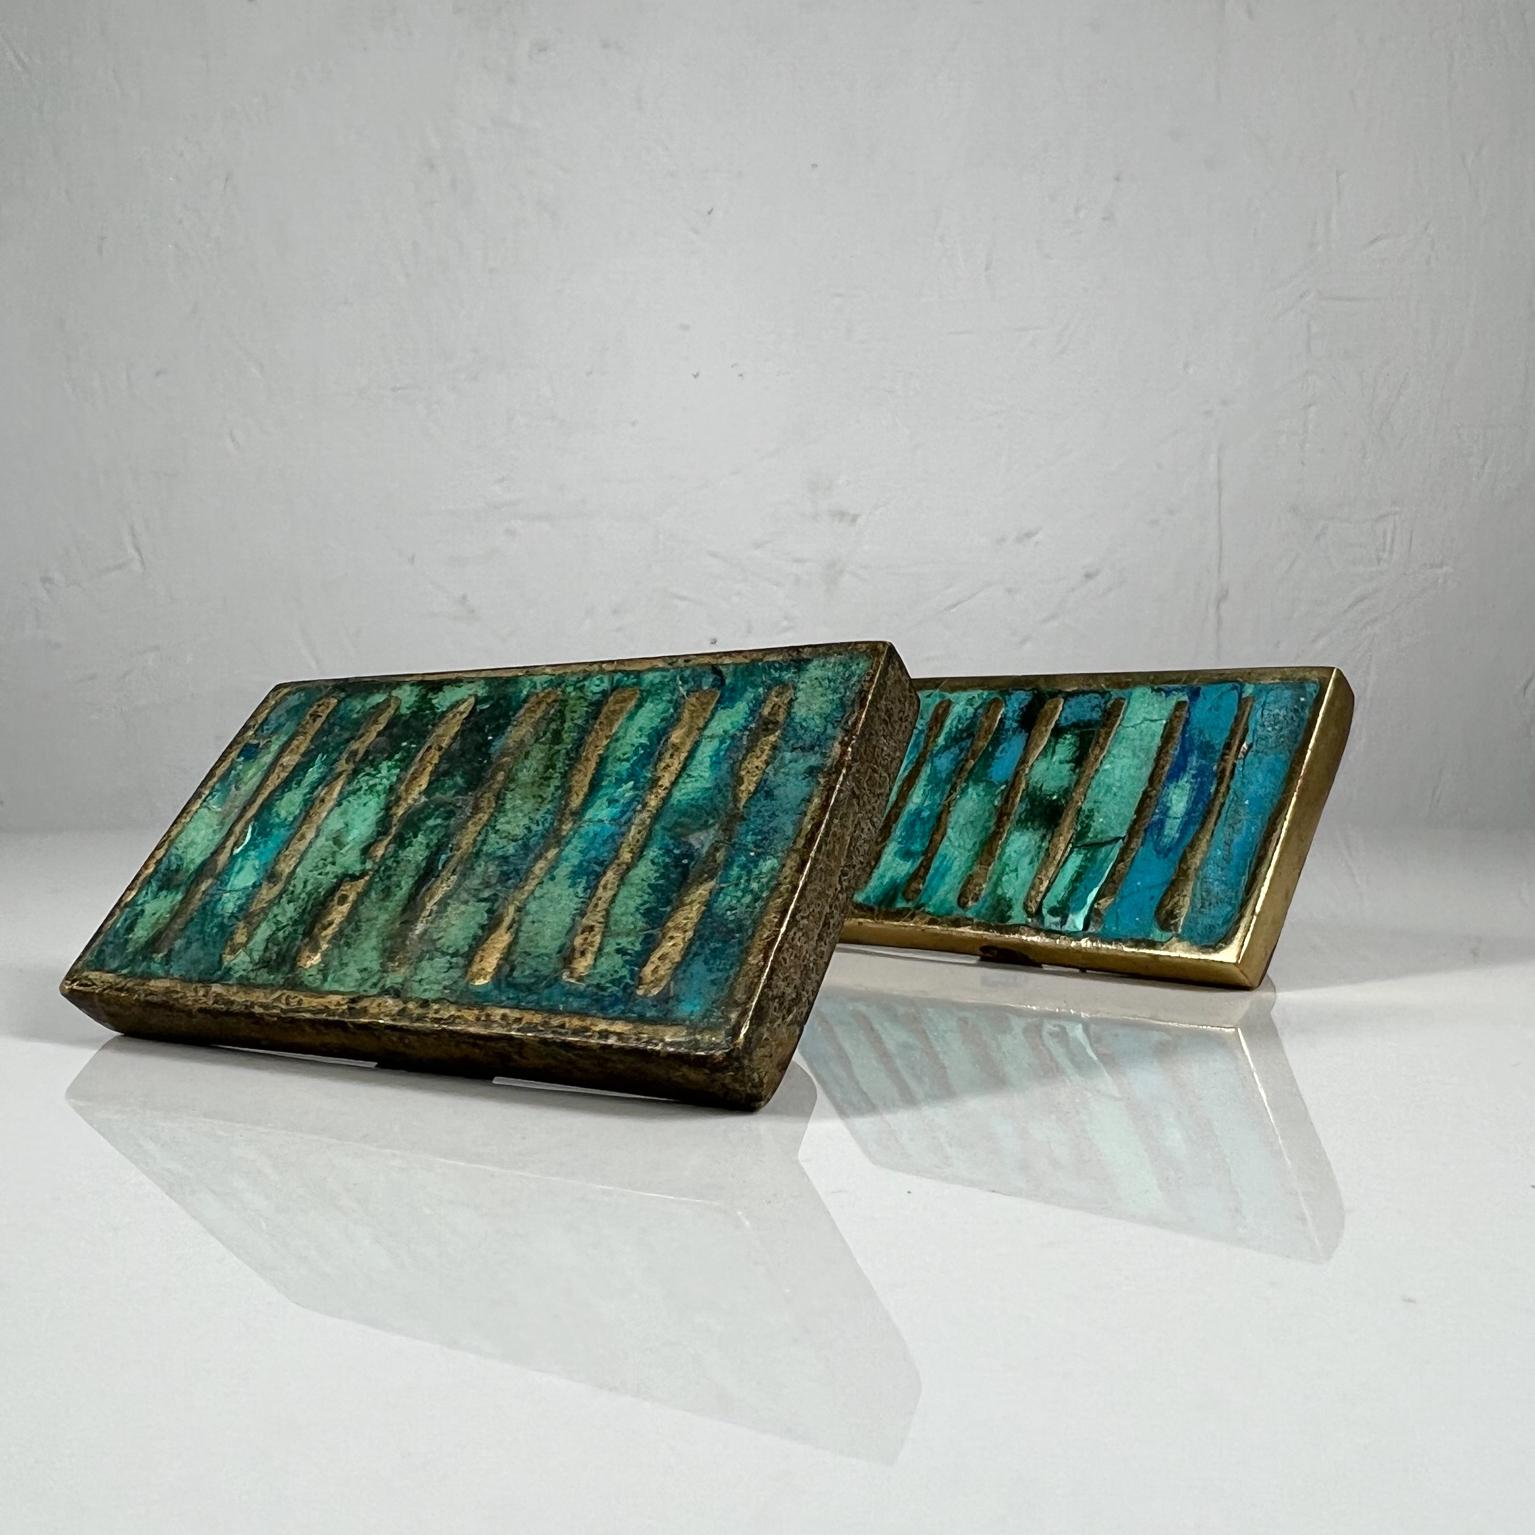 1950s Fabulous Pepe mendoza two malachite & brass rectangular drawer pulls made in Mexico
2.5 w x 1.38 h x .88 d
 Both retain a maker stamp on backside.
One has the original patina. One has been polished by previous owner.
Refer to images